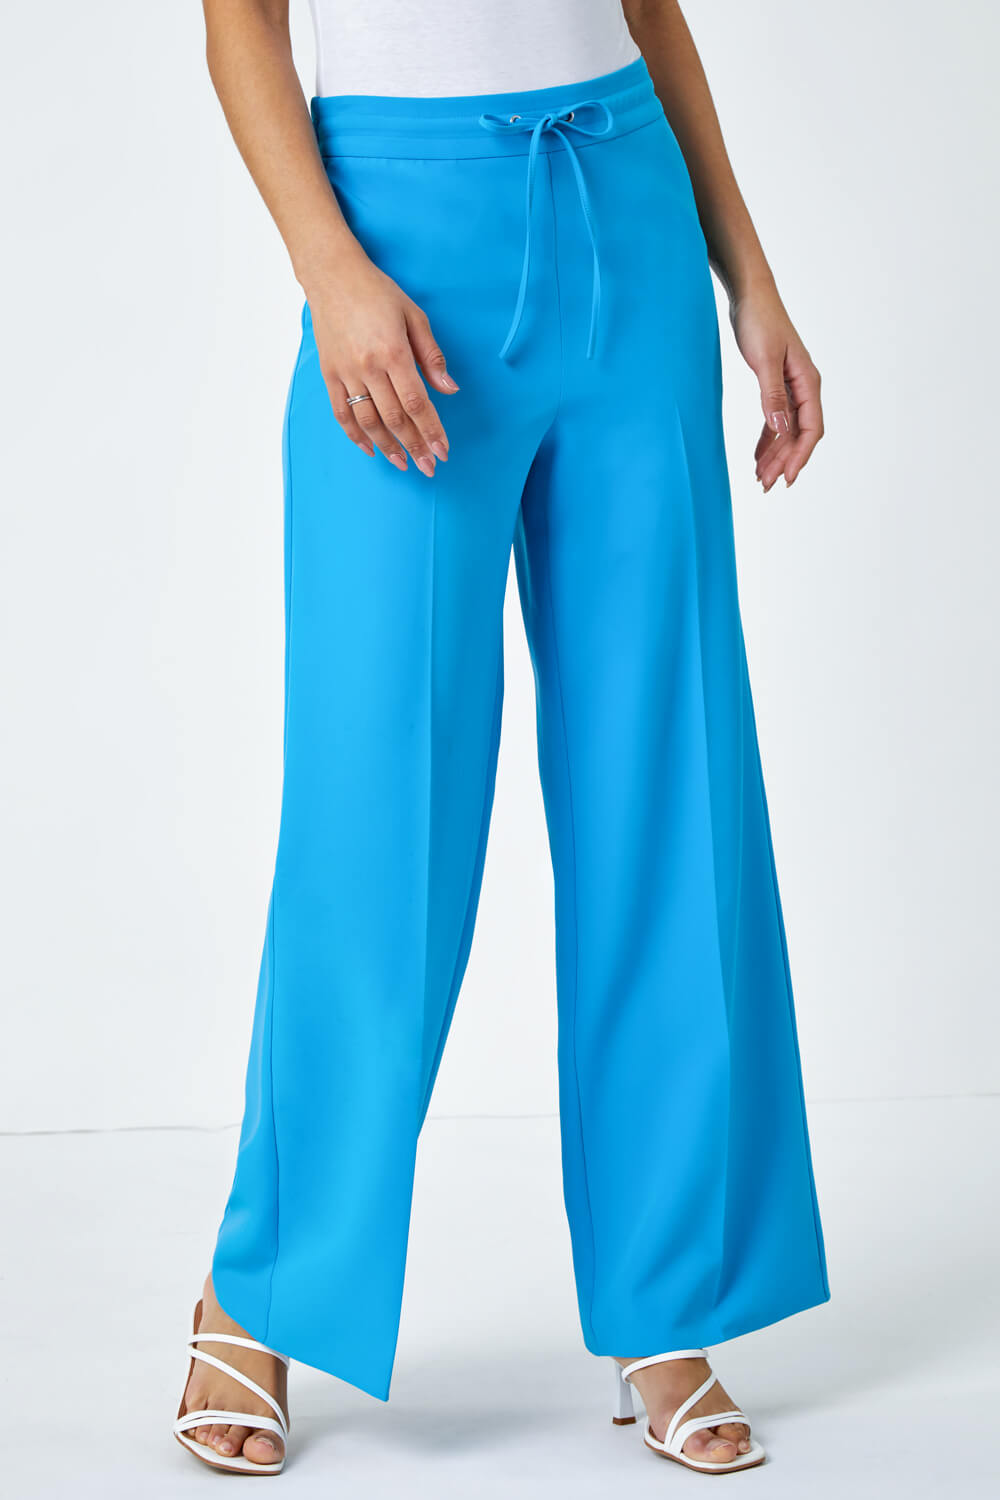 Turquoise Wide Leg Tie Front Stretch Trouser, Image 4 of 5